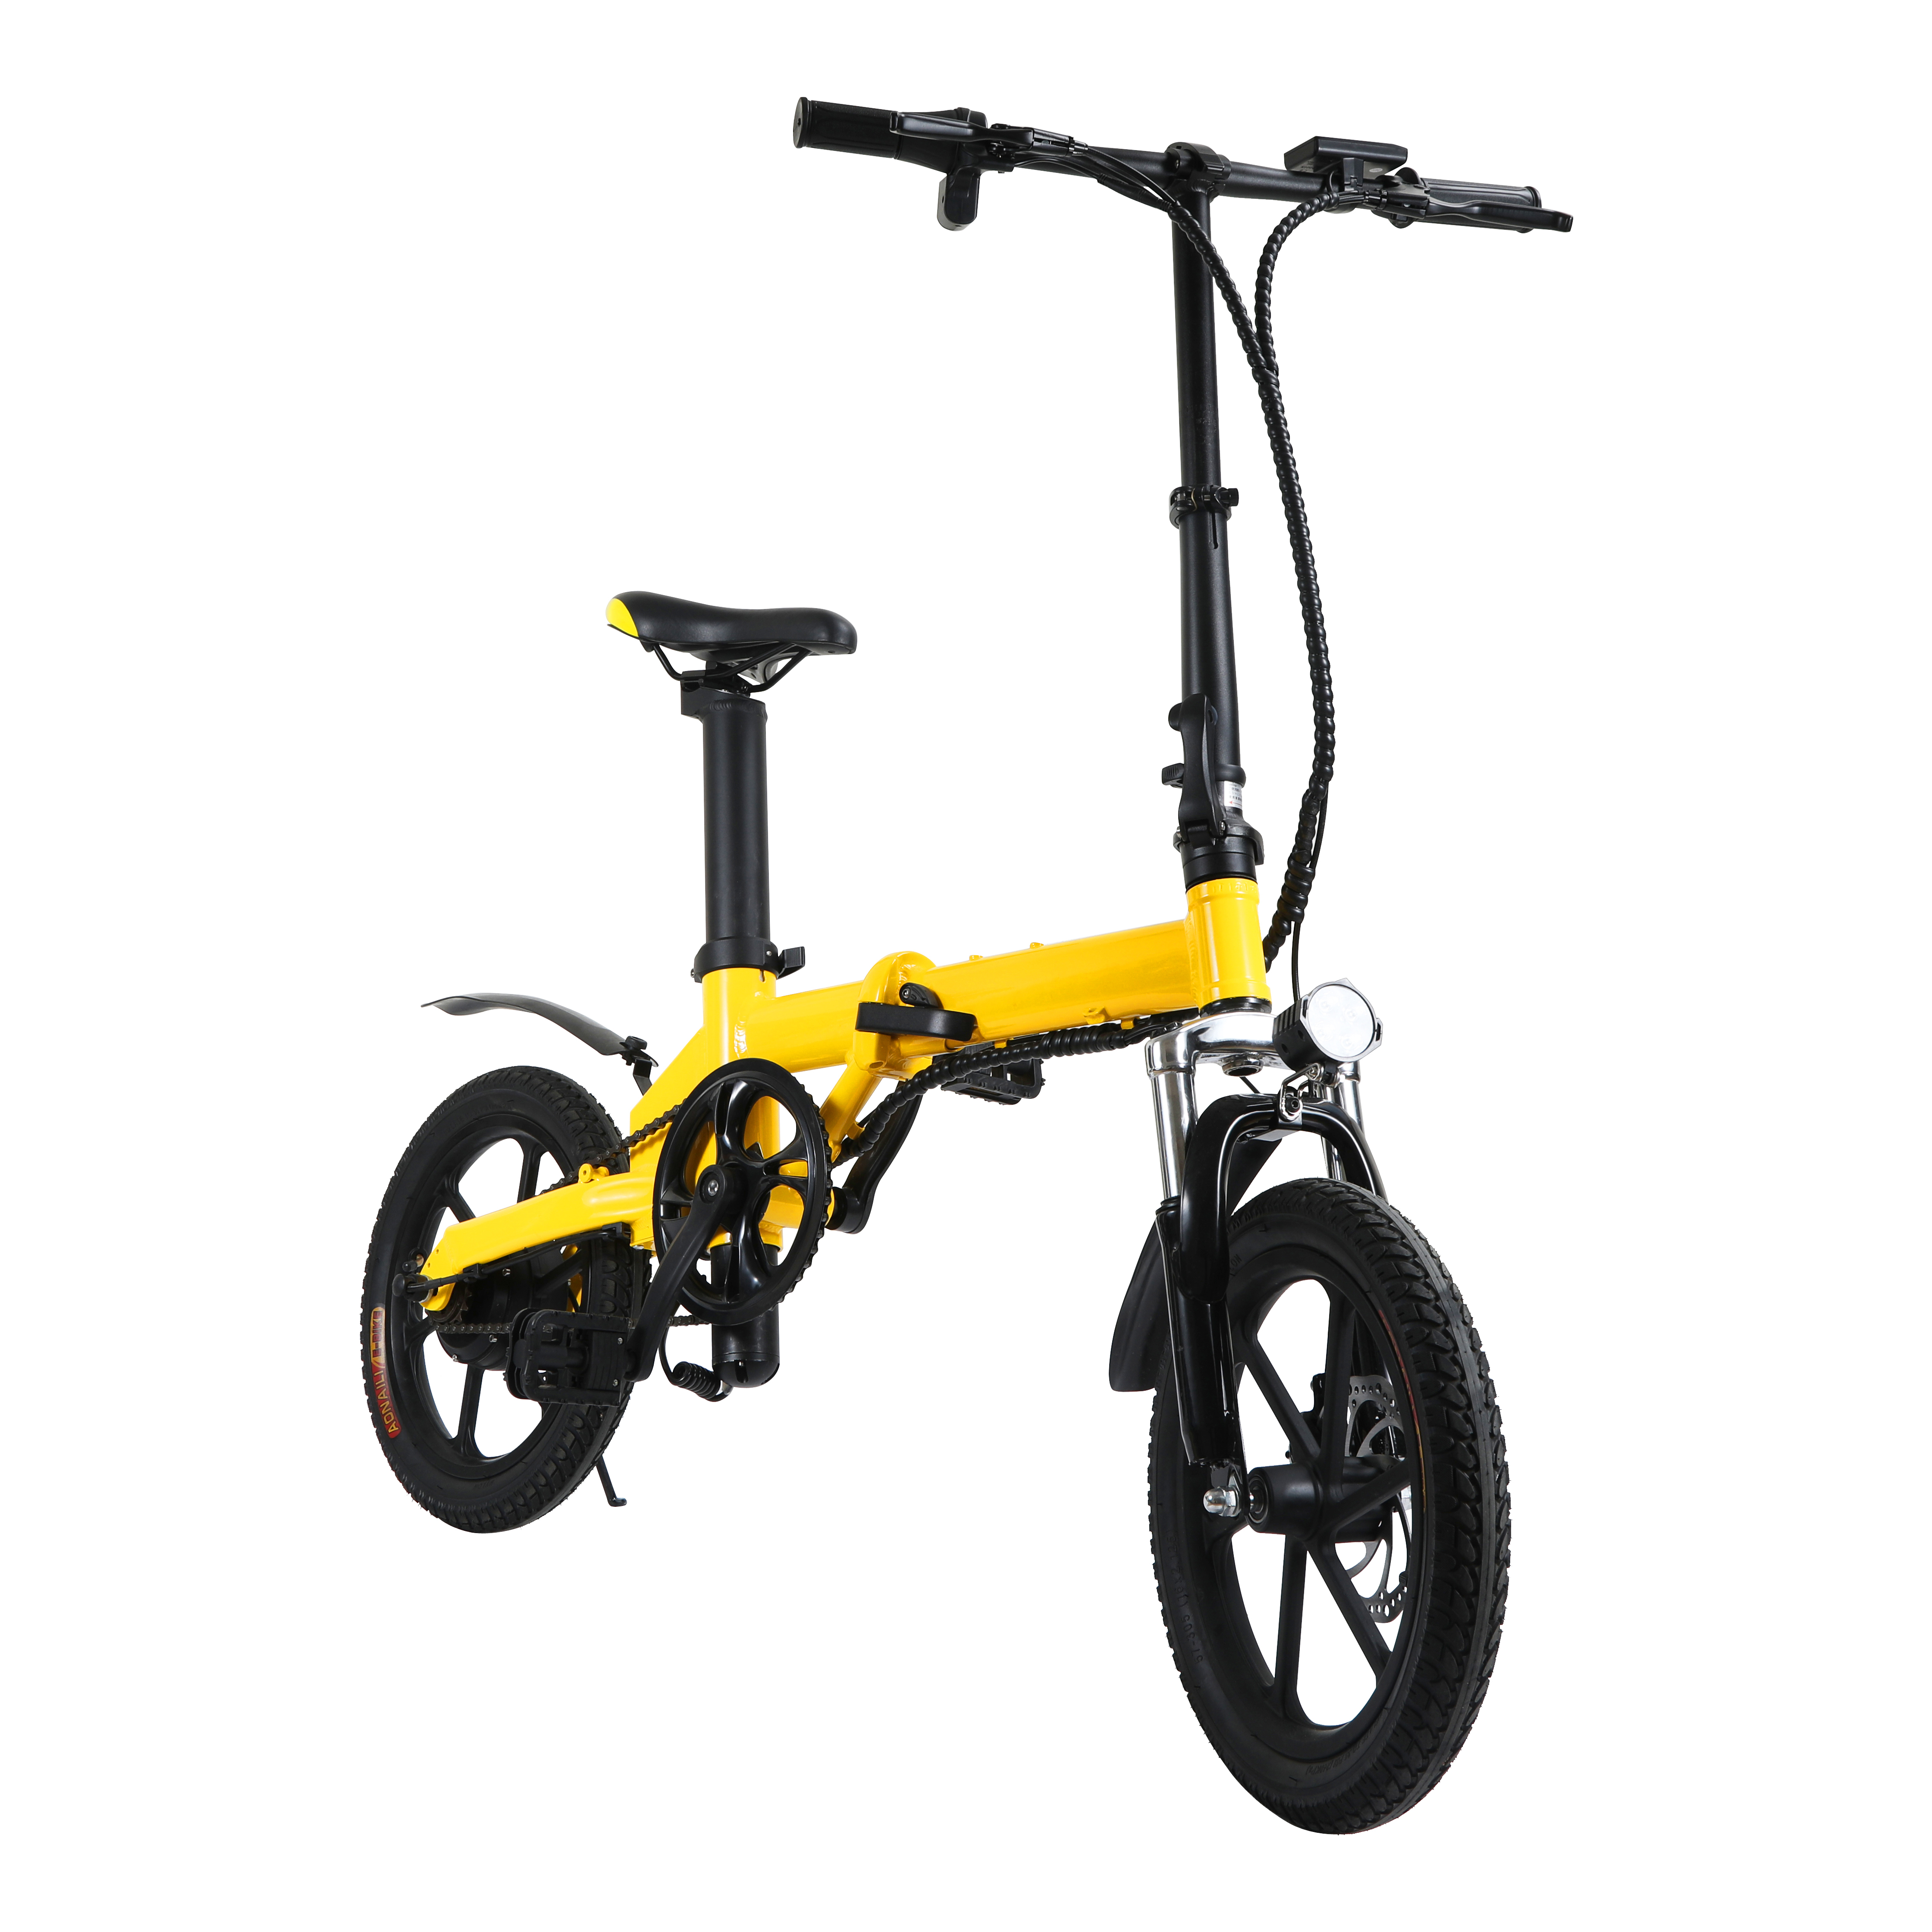 One of Hottest for Electric Motorcycle Scooter -
 Electric Bike 16 inch Foldable E-Bike VB160 – Vitek